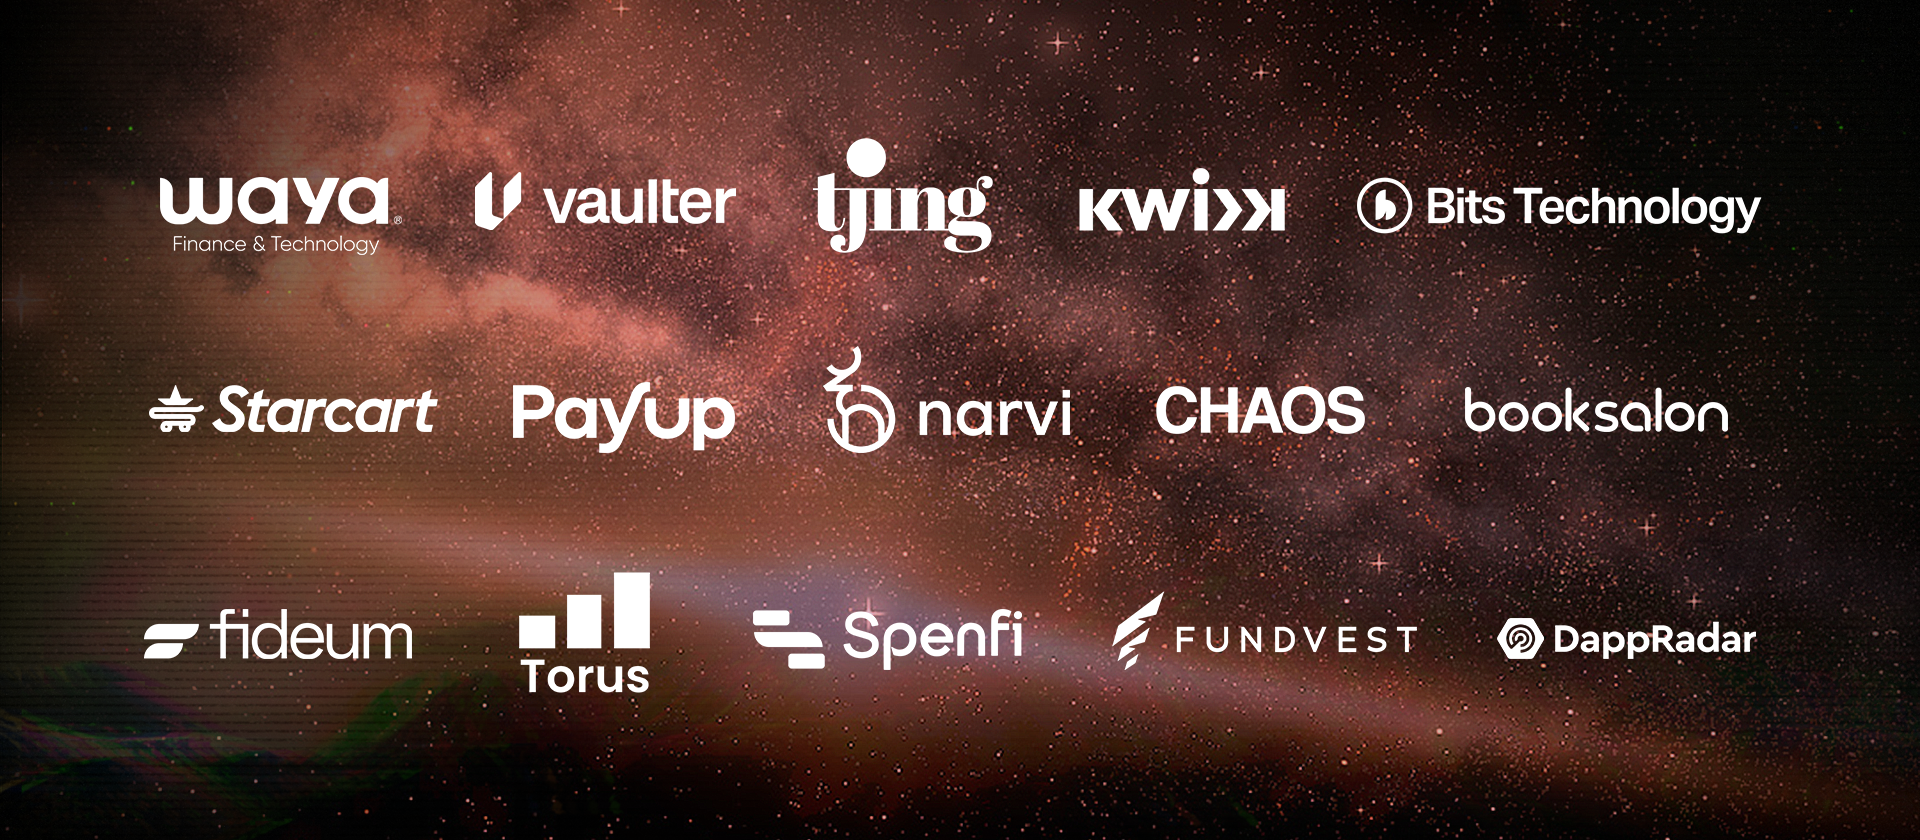 Five Swedish fintech startups will compete in Lighthouse FINITIV by Mastercard